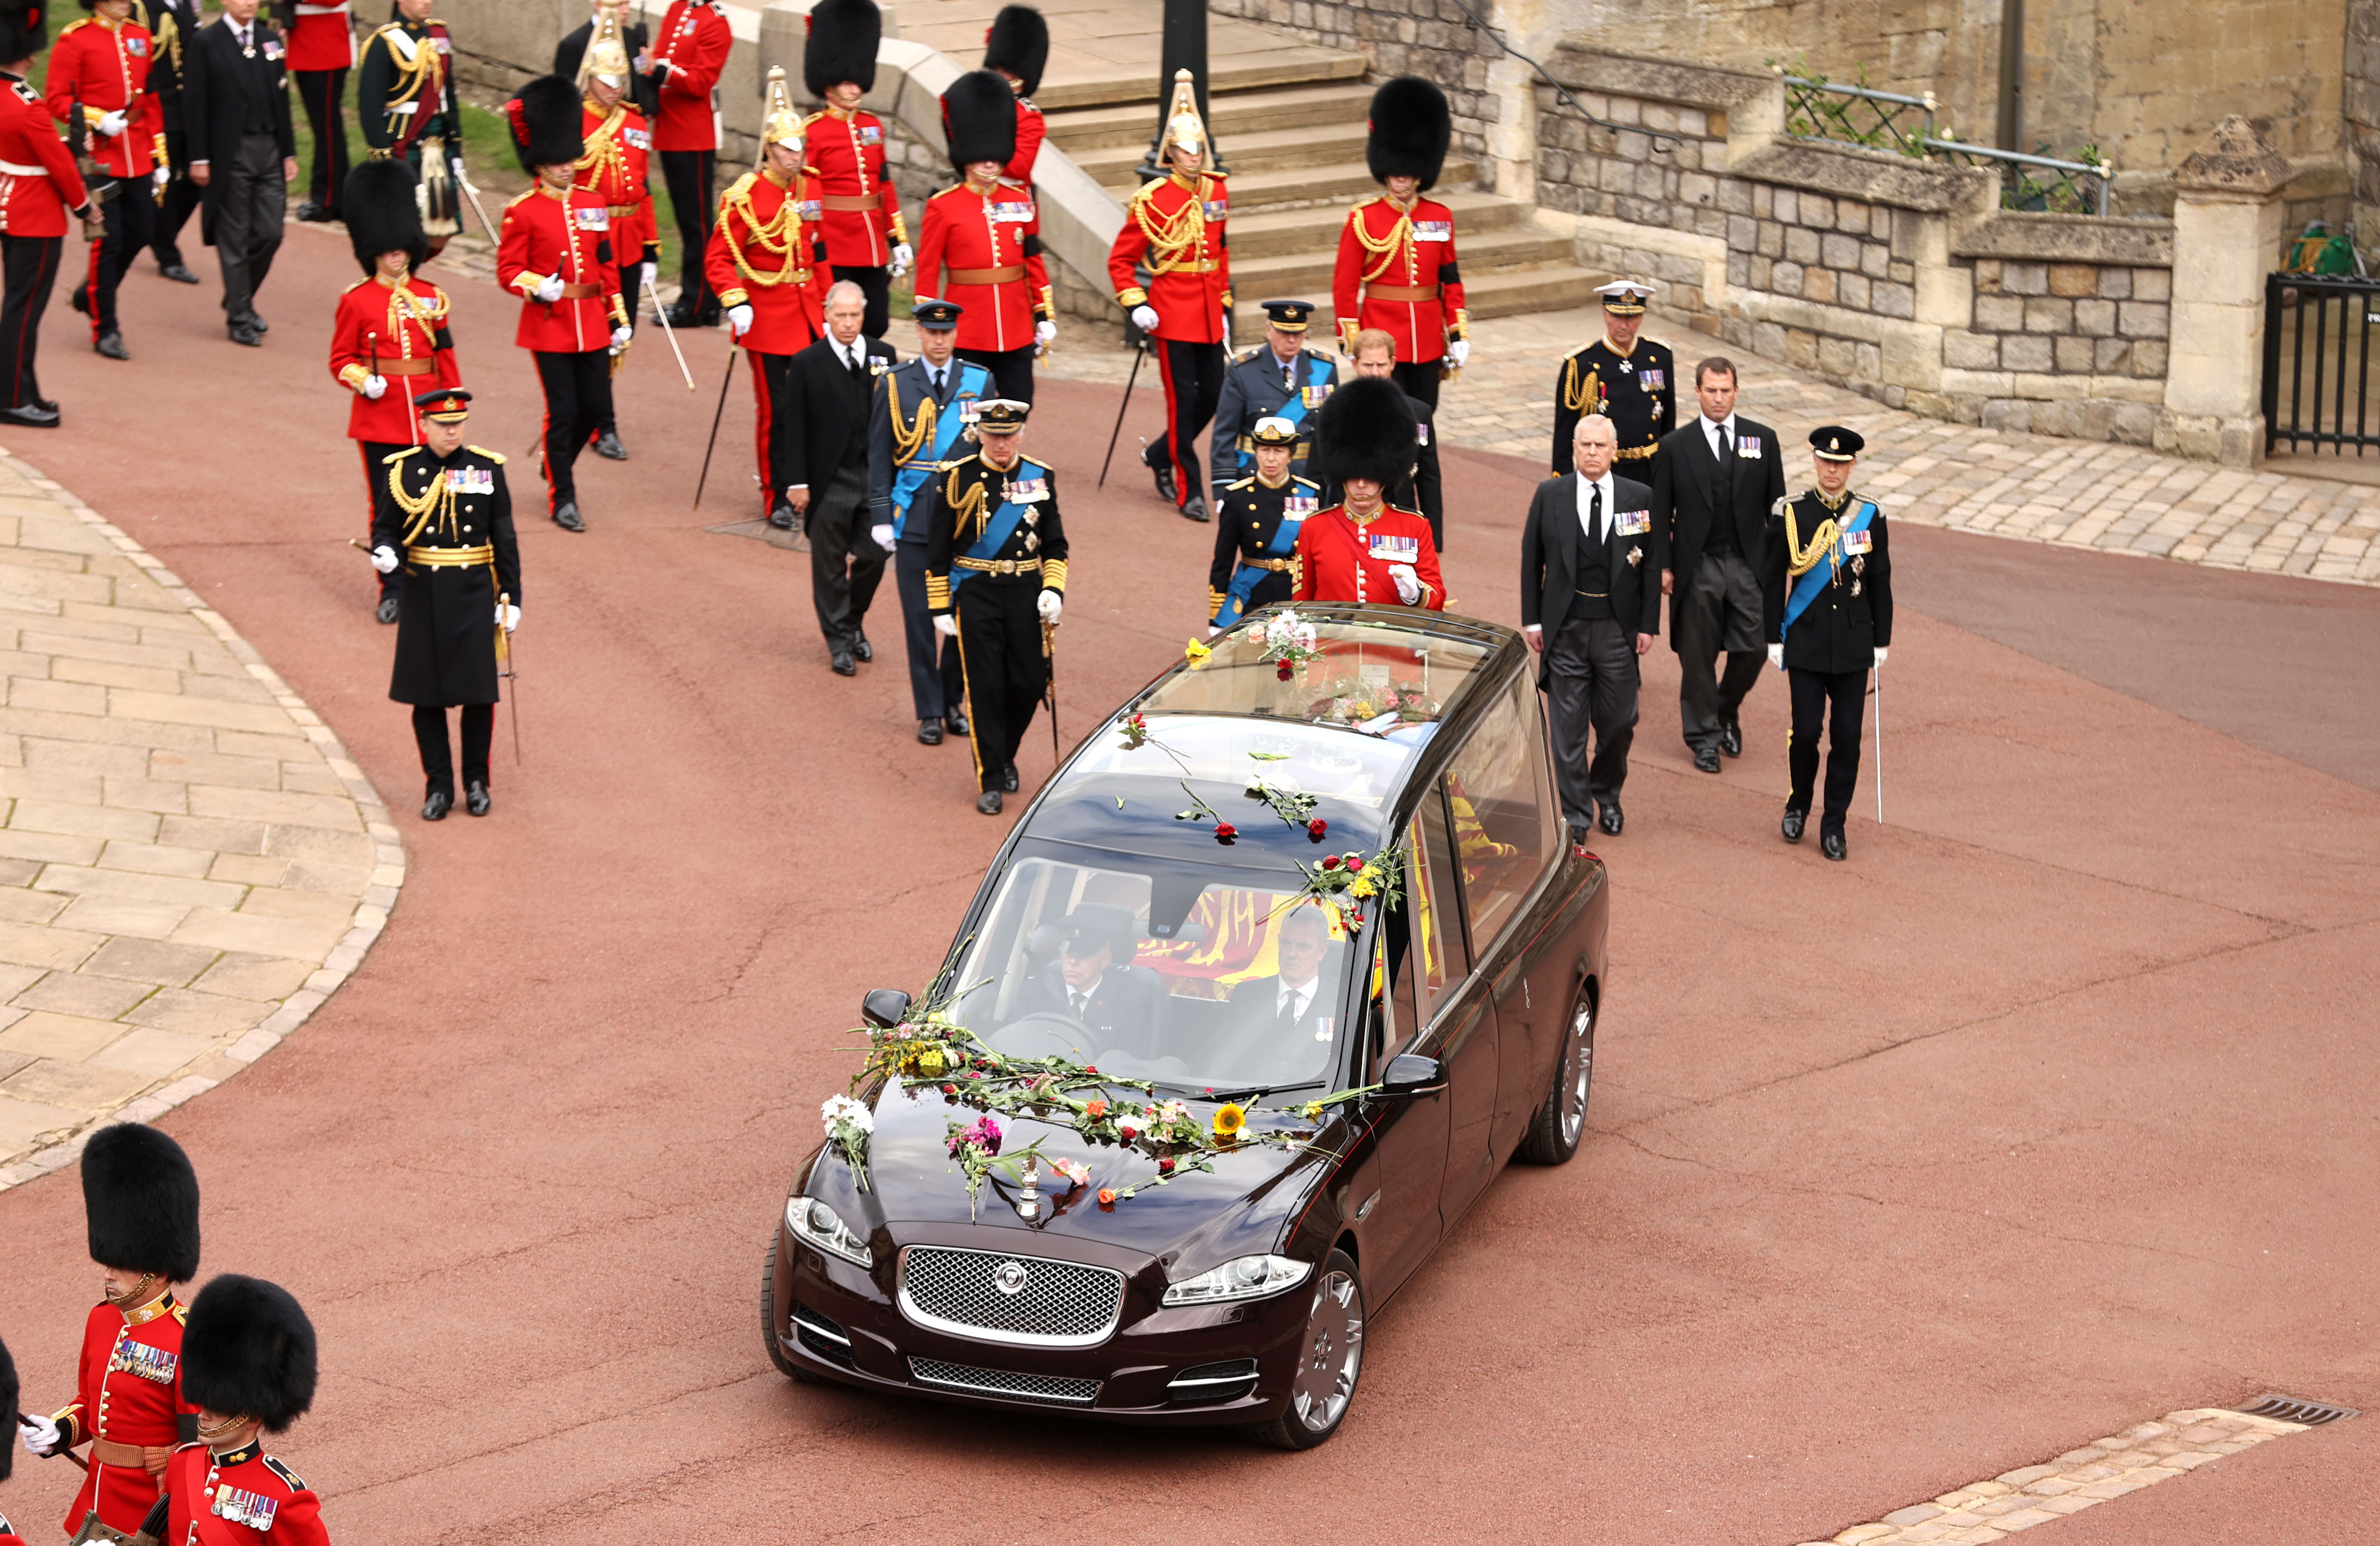 <p>The royal state hearse -- covered in flowers thrown by the grieving public and carrying the coffin of Queen Elizabeth II, which was followed by her children and grandsons -- arrived at Windsor Castle in Windsor, England, for the monarch's committal service at St. George's Chapel on Sept. 19, 2022, following <a href="https://www.wonderwall.com/celebrity/royals/best-photos-from-queen-elizabeth-ii-funeral-king-charles-princes-william-prince-harry-george-charlotte-kate-meghan652347.gallery">her state funeral</a> in London.</p>